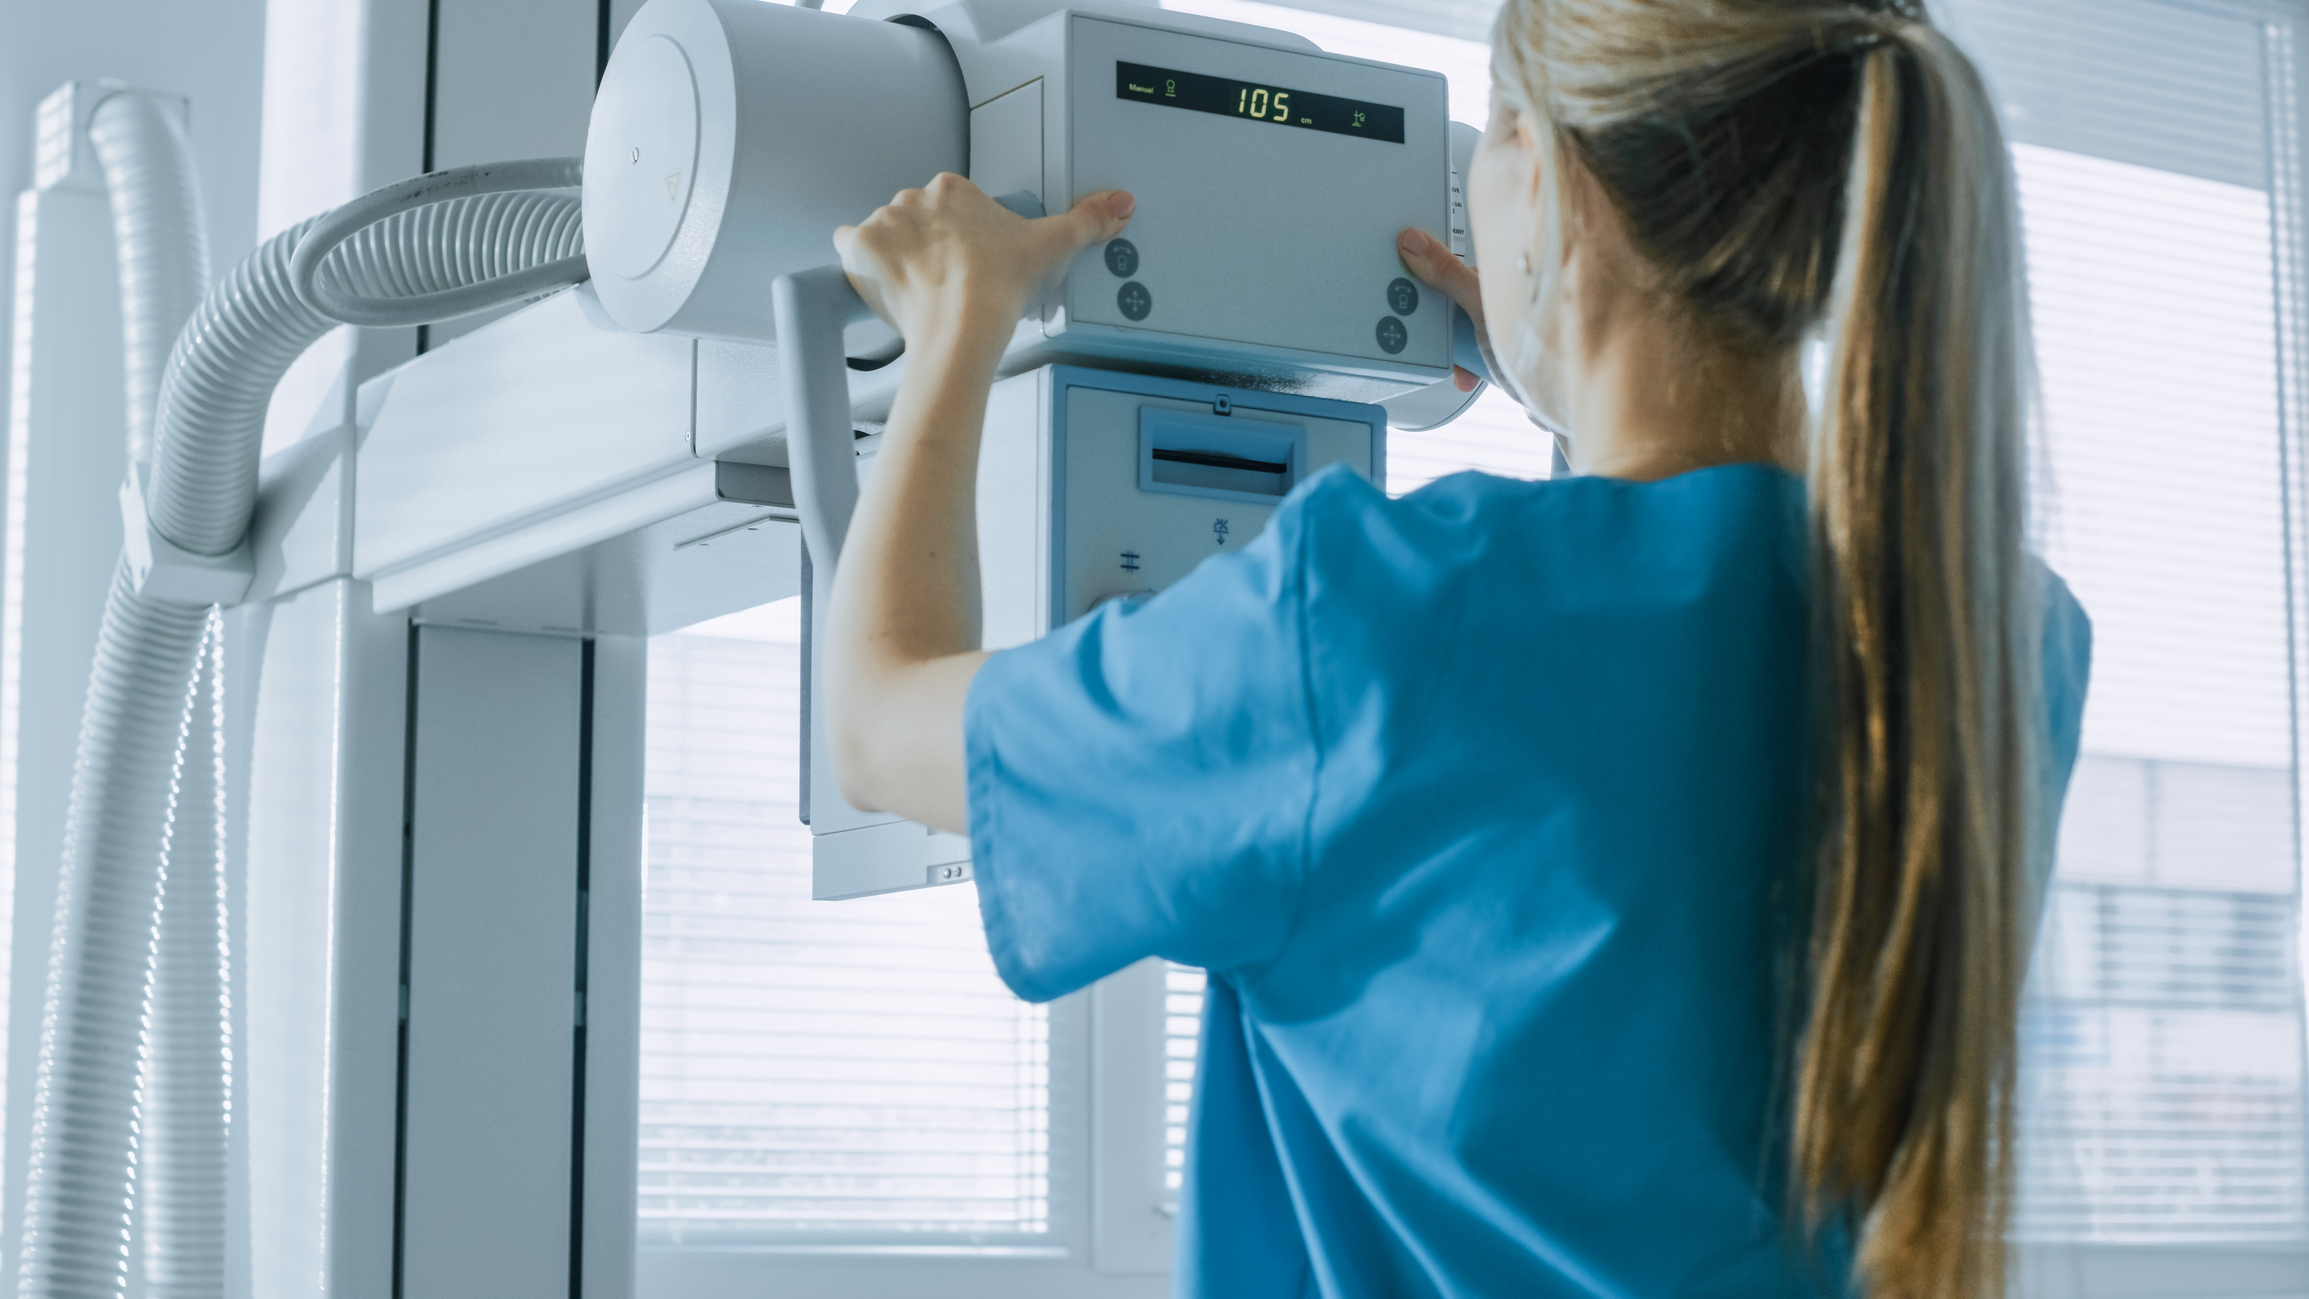 In the Hospital, Female Technician adjusts X-Ray Scanner / Machine. Modern Hospital with Technologically Advanced Medical Equipment and Professional Personnel.